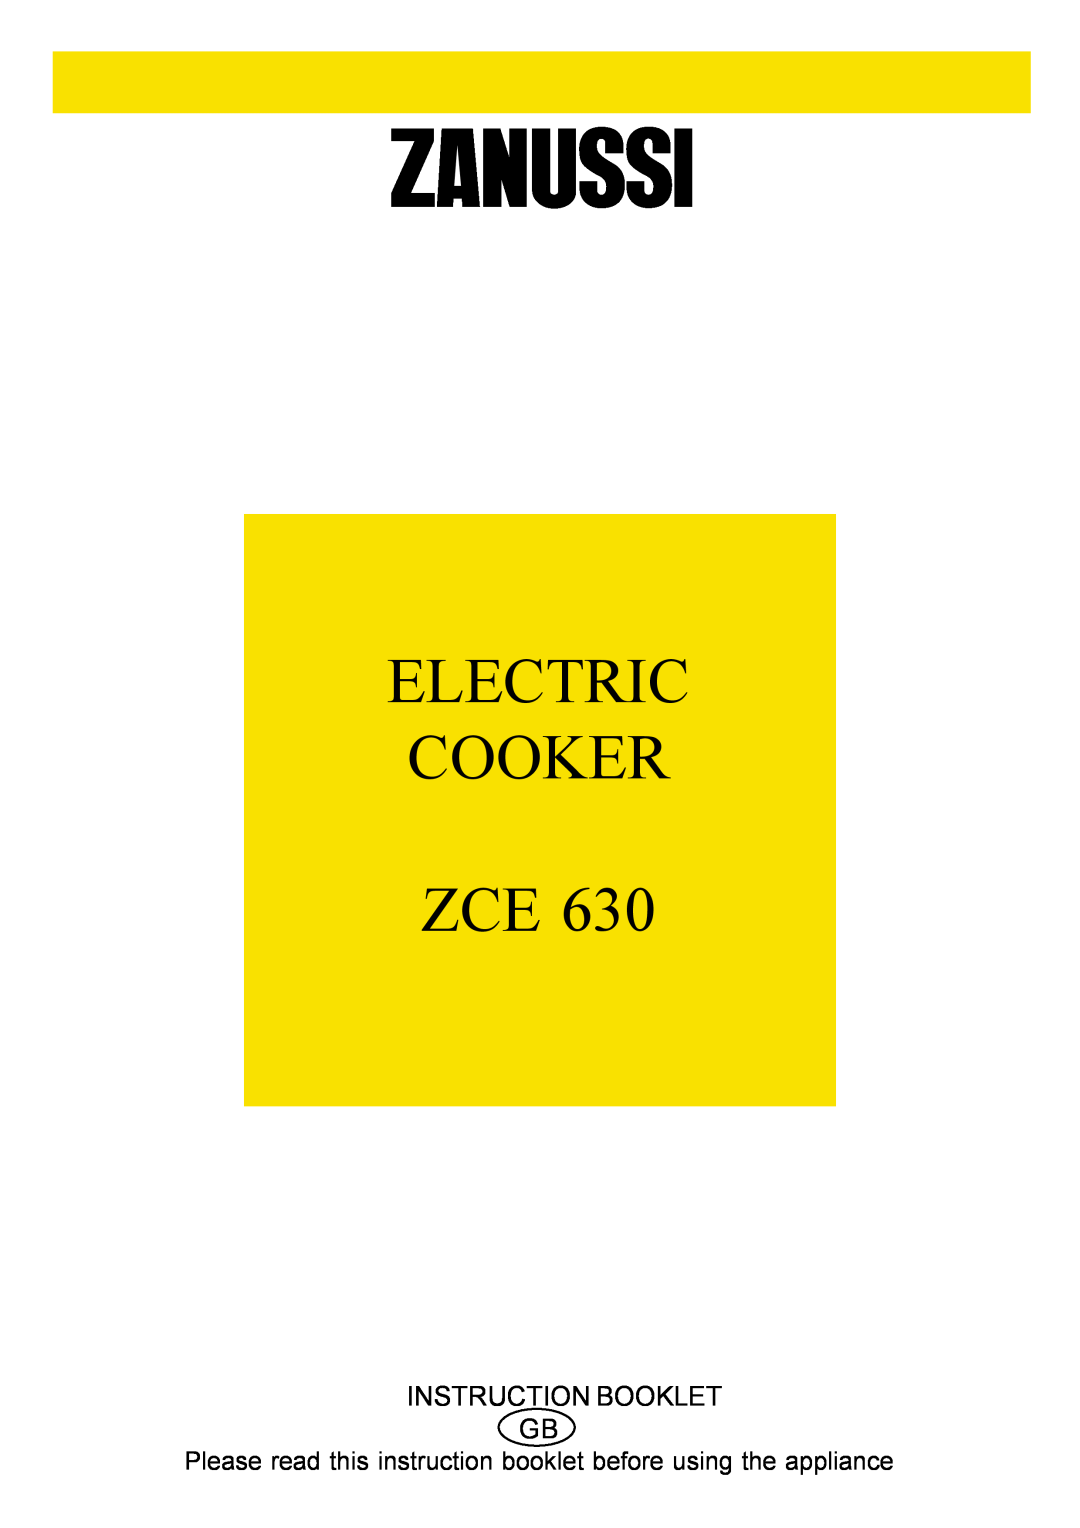 Zanussi ZCE 630 manual Please read this instruction booklet before using the appliance, Electric Cooker Zce 